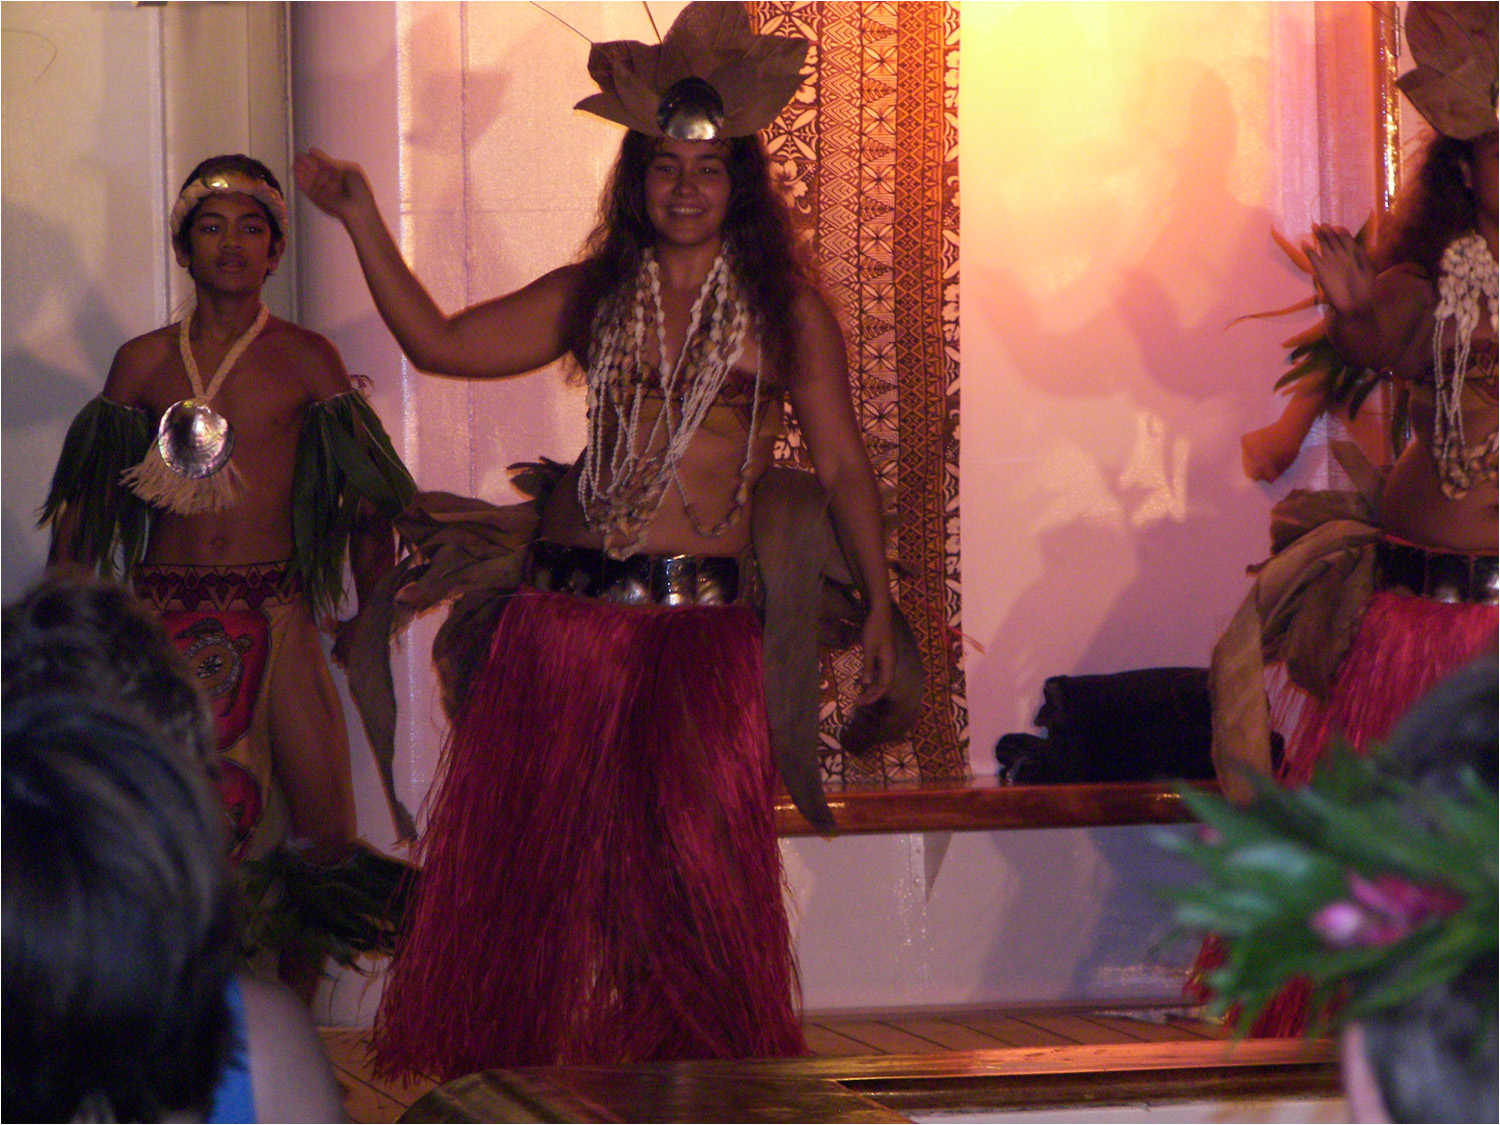 Tahitian show on deck 8 early Saturday evening.